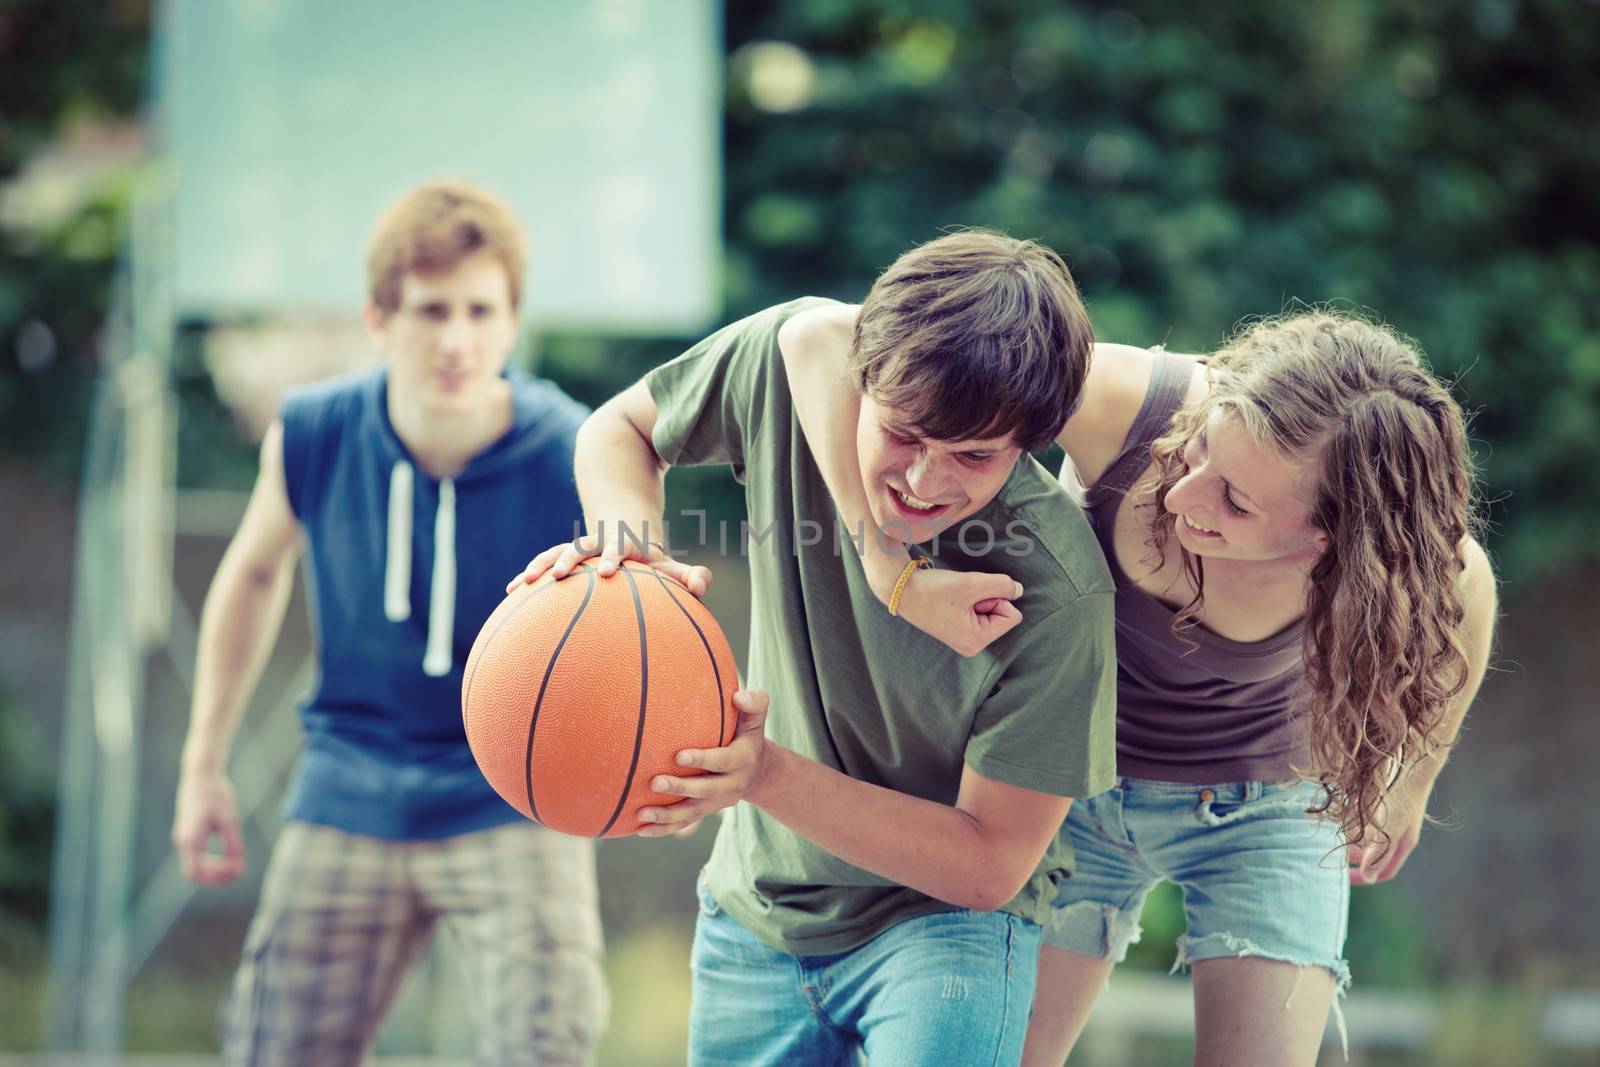 Teens playing a game of basketball on an outdoor court.